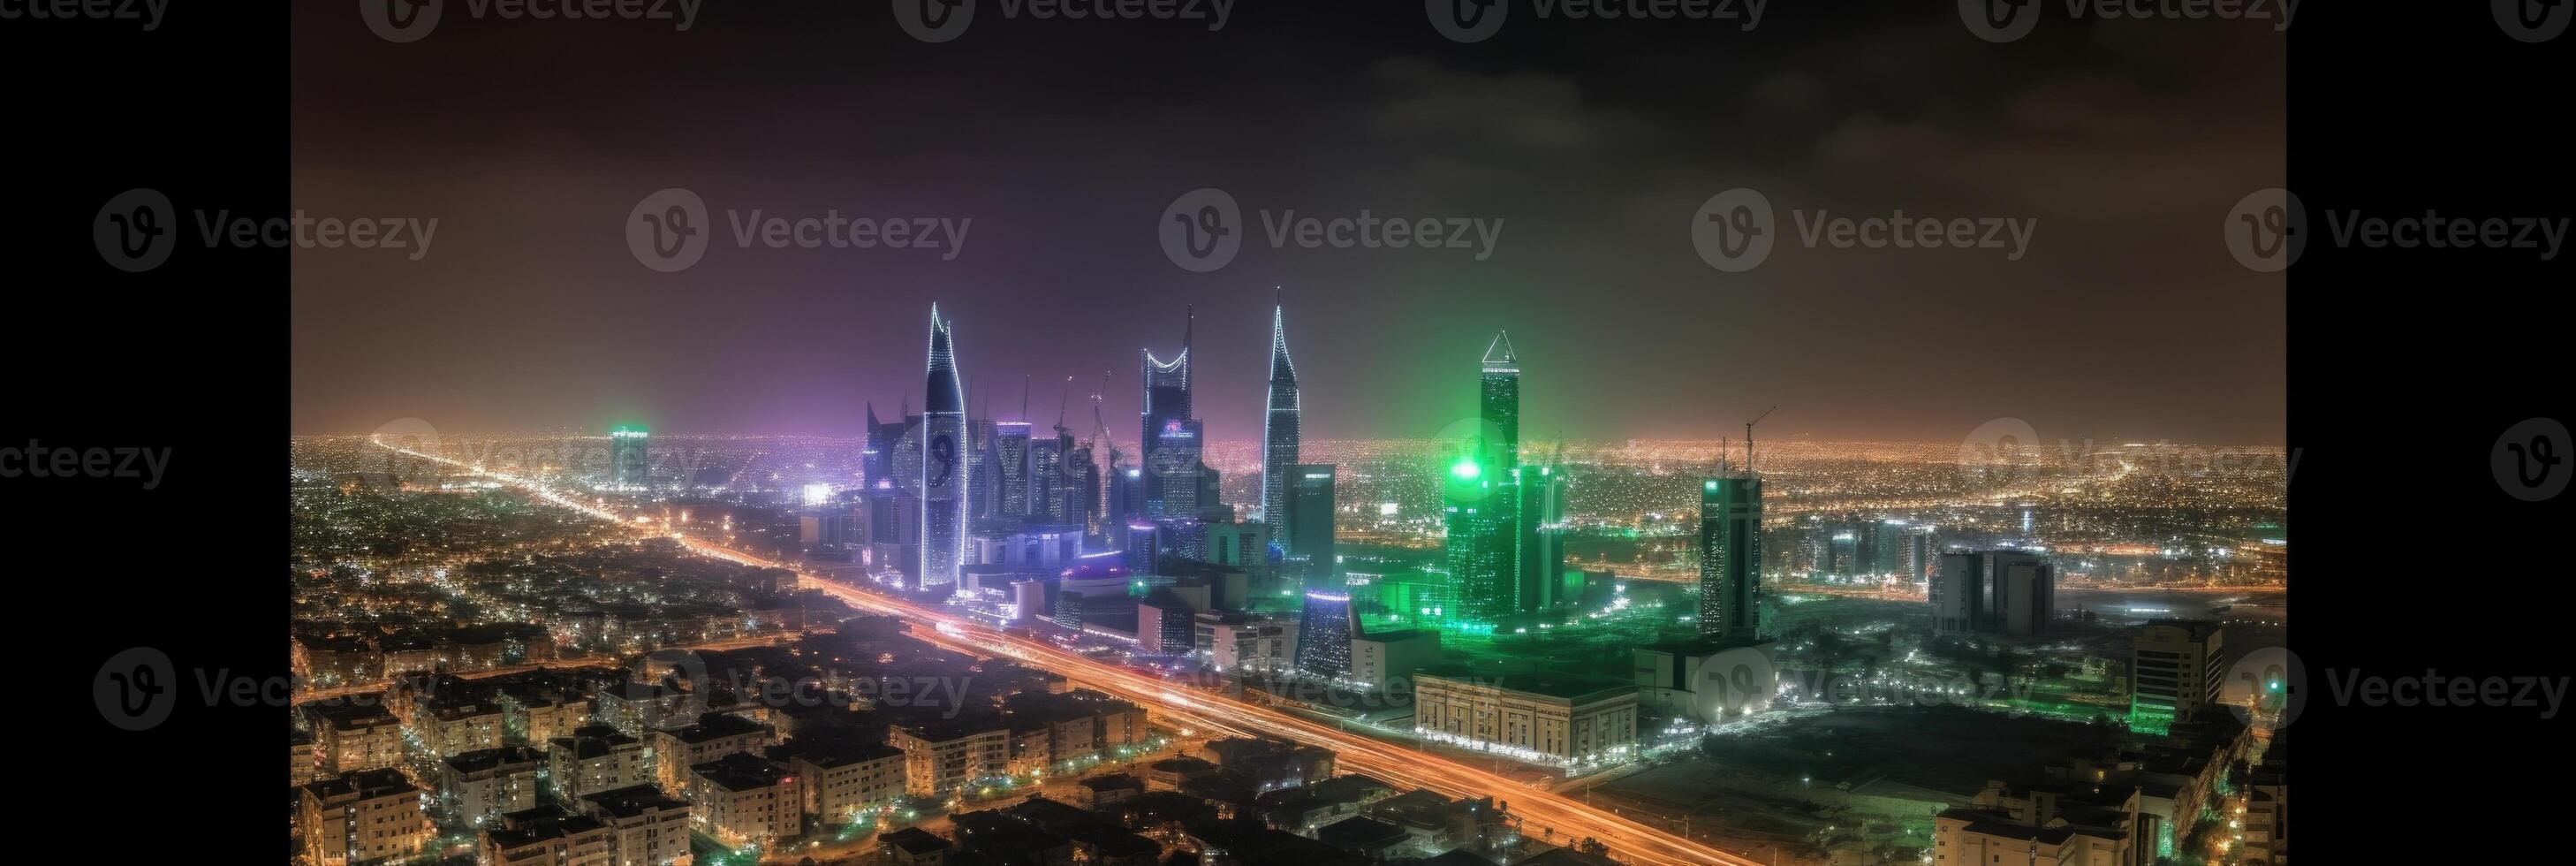 Panoramic Night City Shot of Riyadh Showing Skyline Landmarks, Office and Residential Buildings in South Arabia. Technology. photo